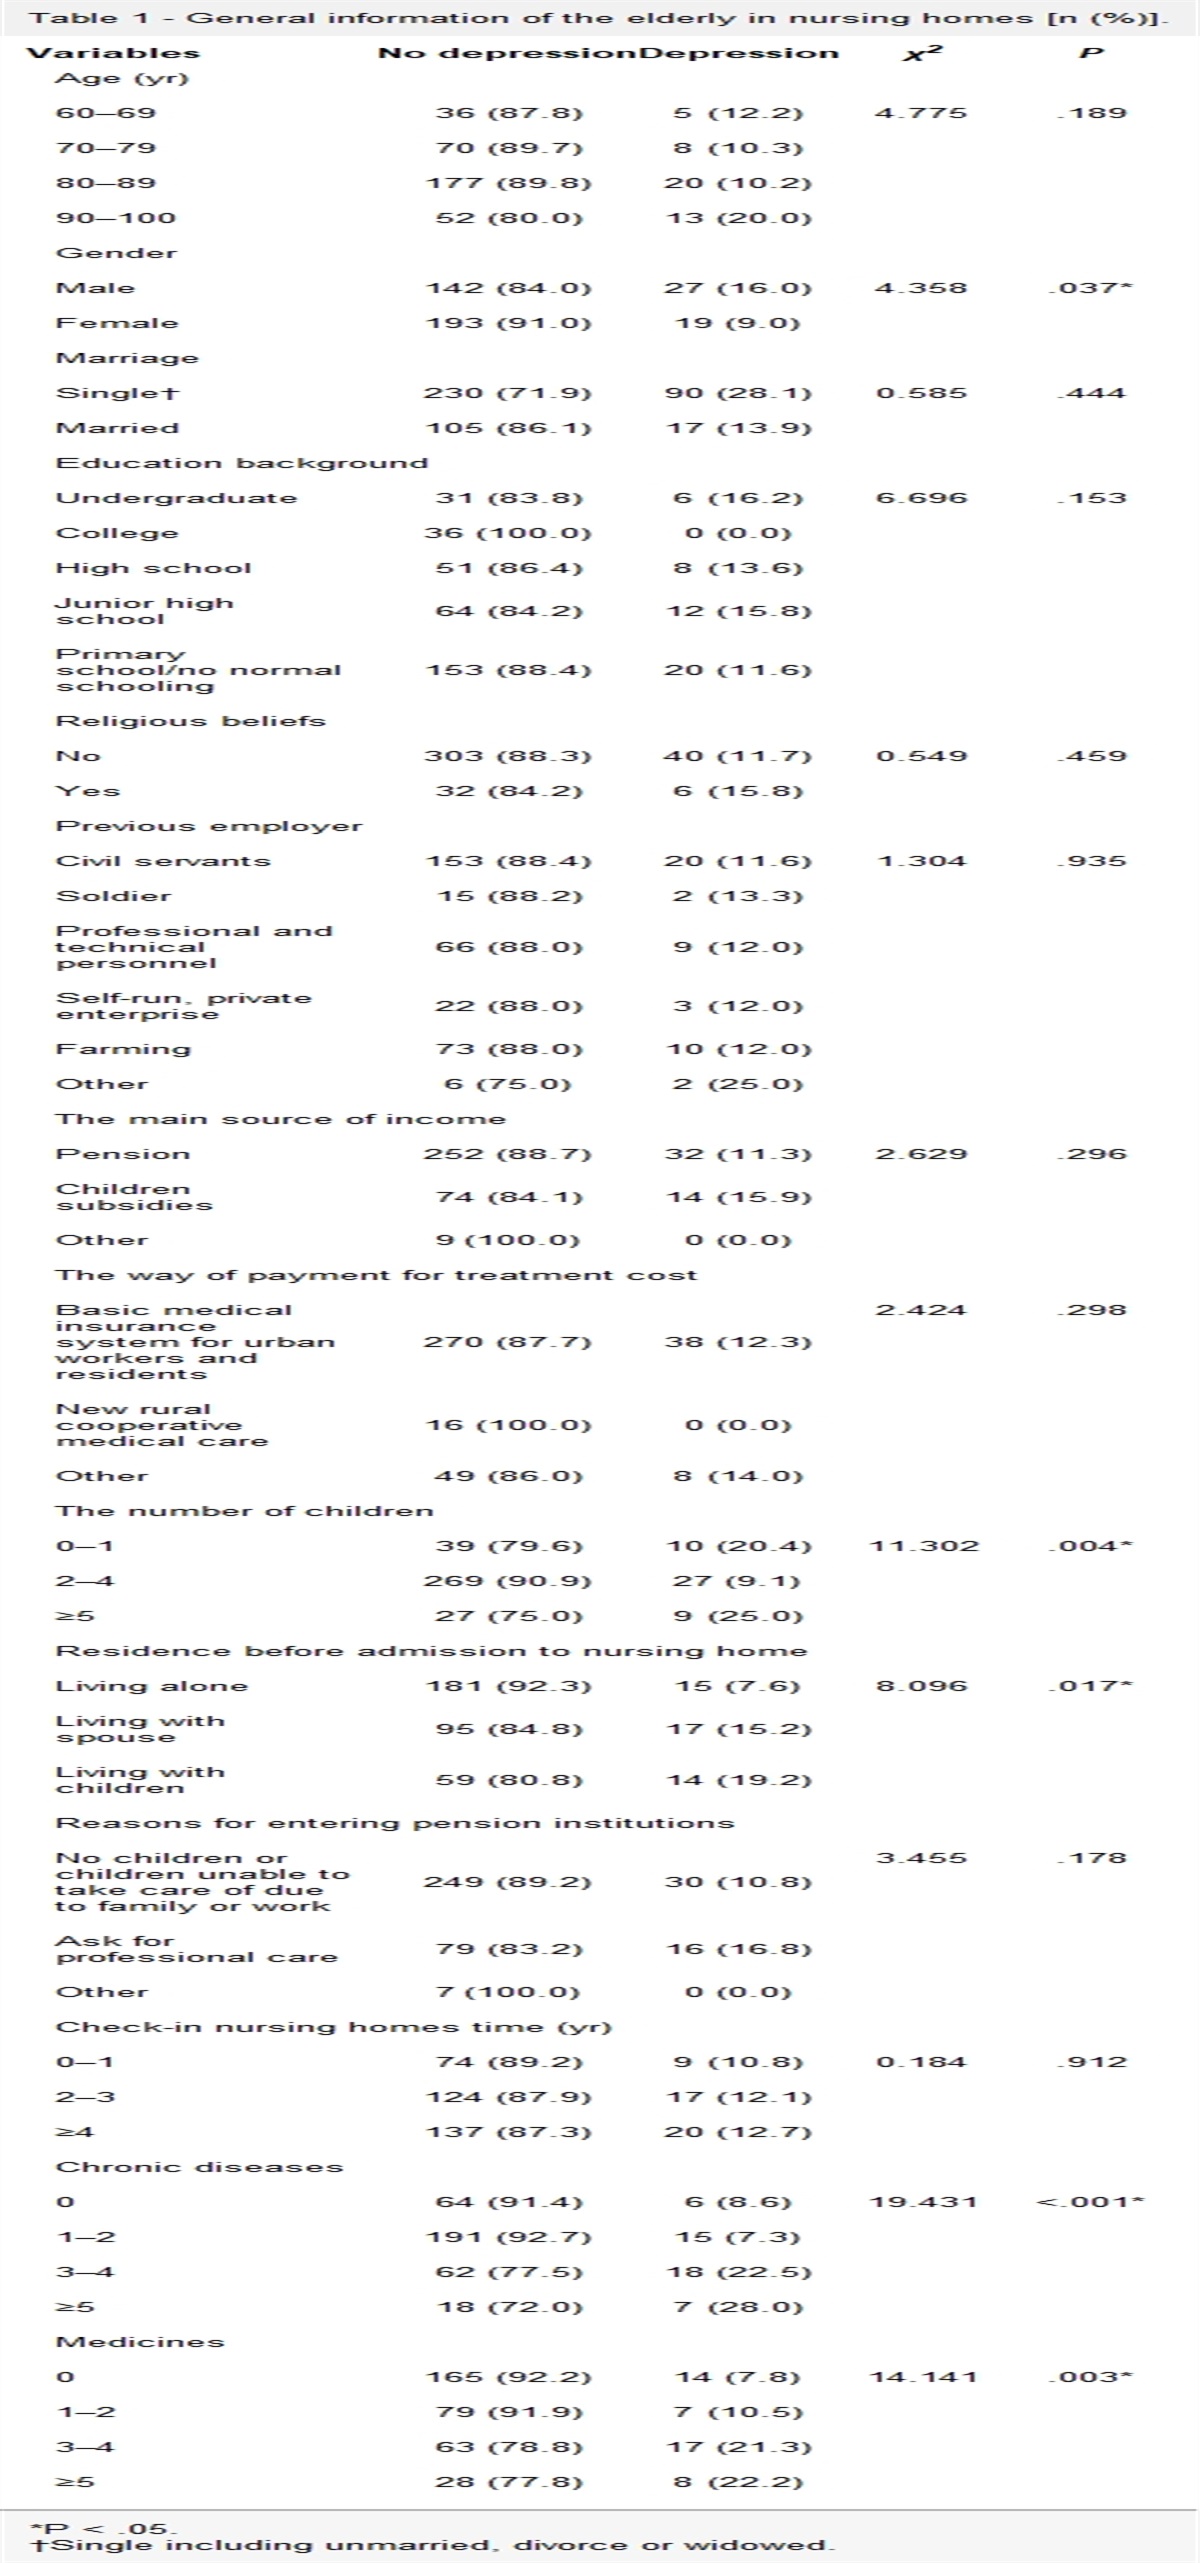 Depressive symptoms and physical function among the elderly in nursing homes during the COVID-19 pandemic in China: A cross-sectional study